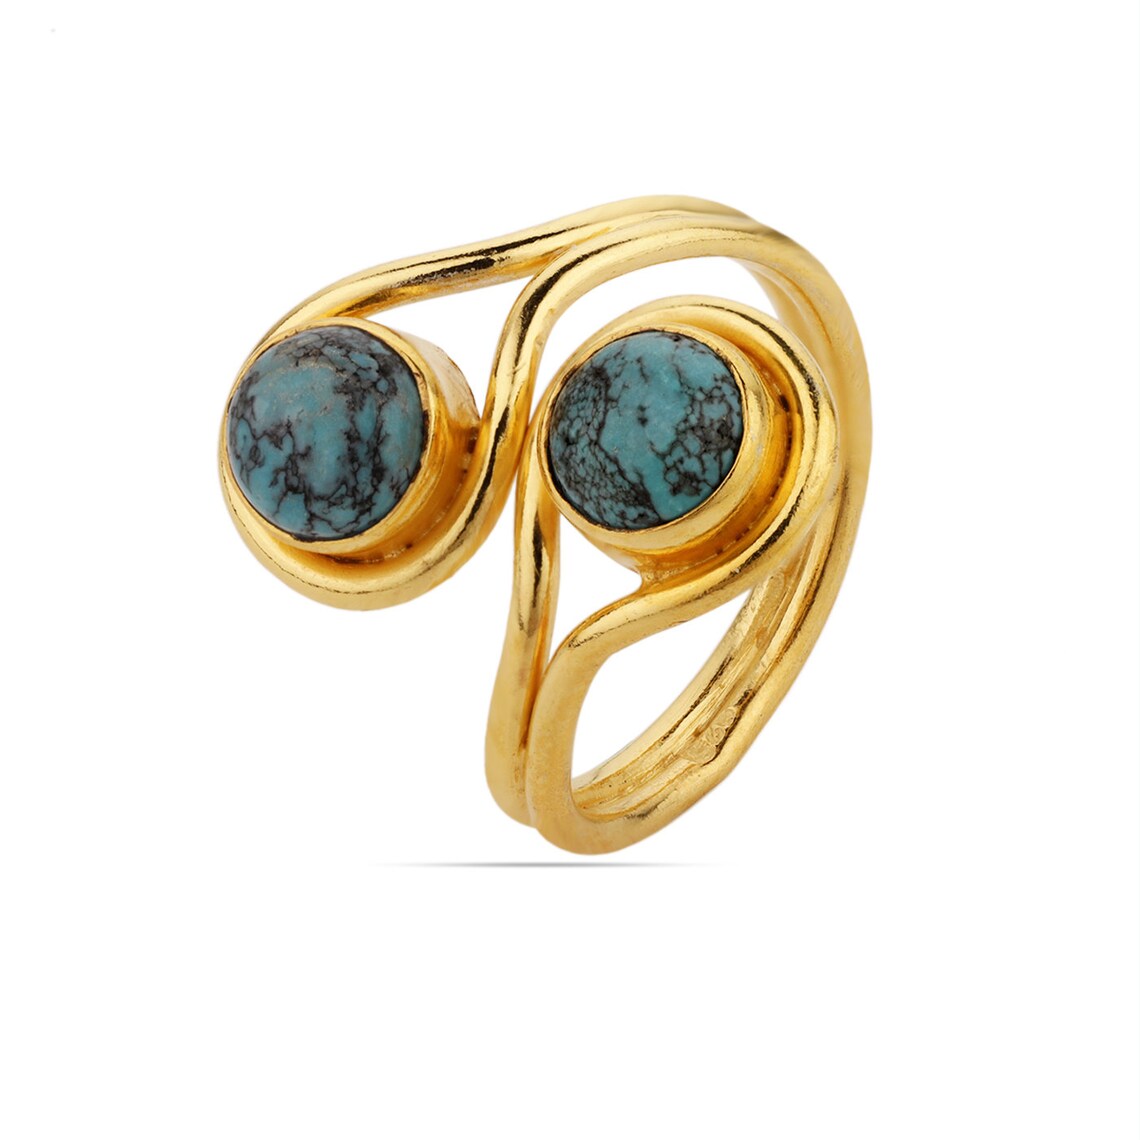 Adjustable Solid Sterling Silver - Gold Plated on 925 Sterling Silver Ring - Turquoise Ring